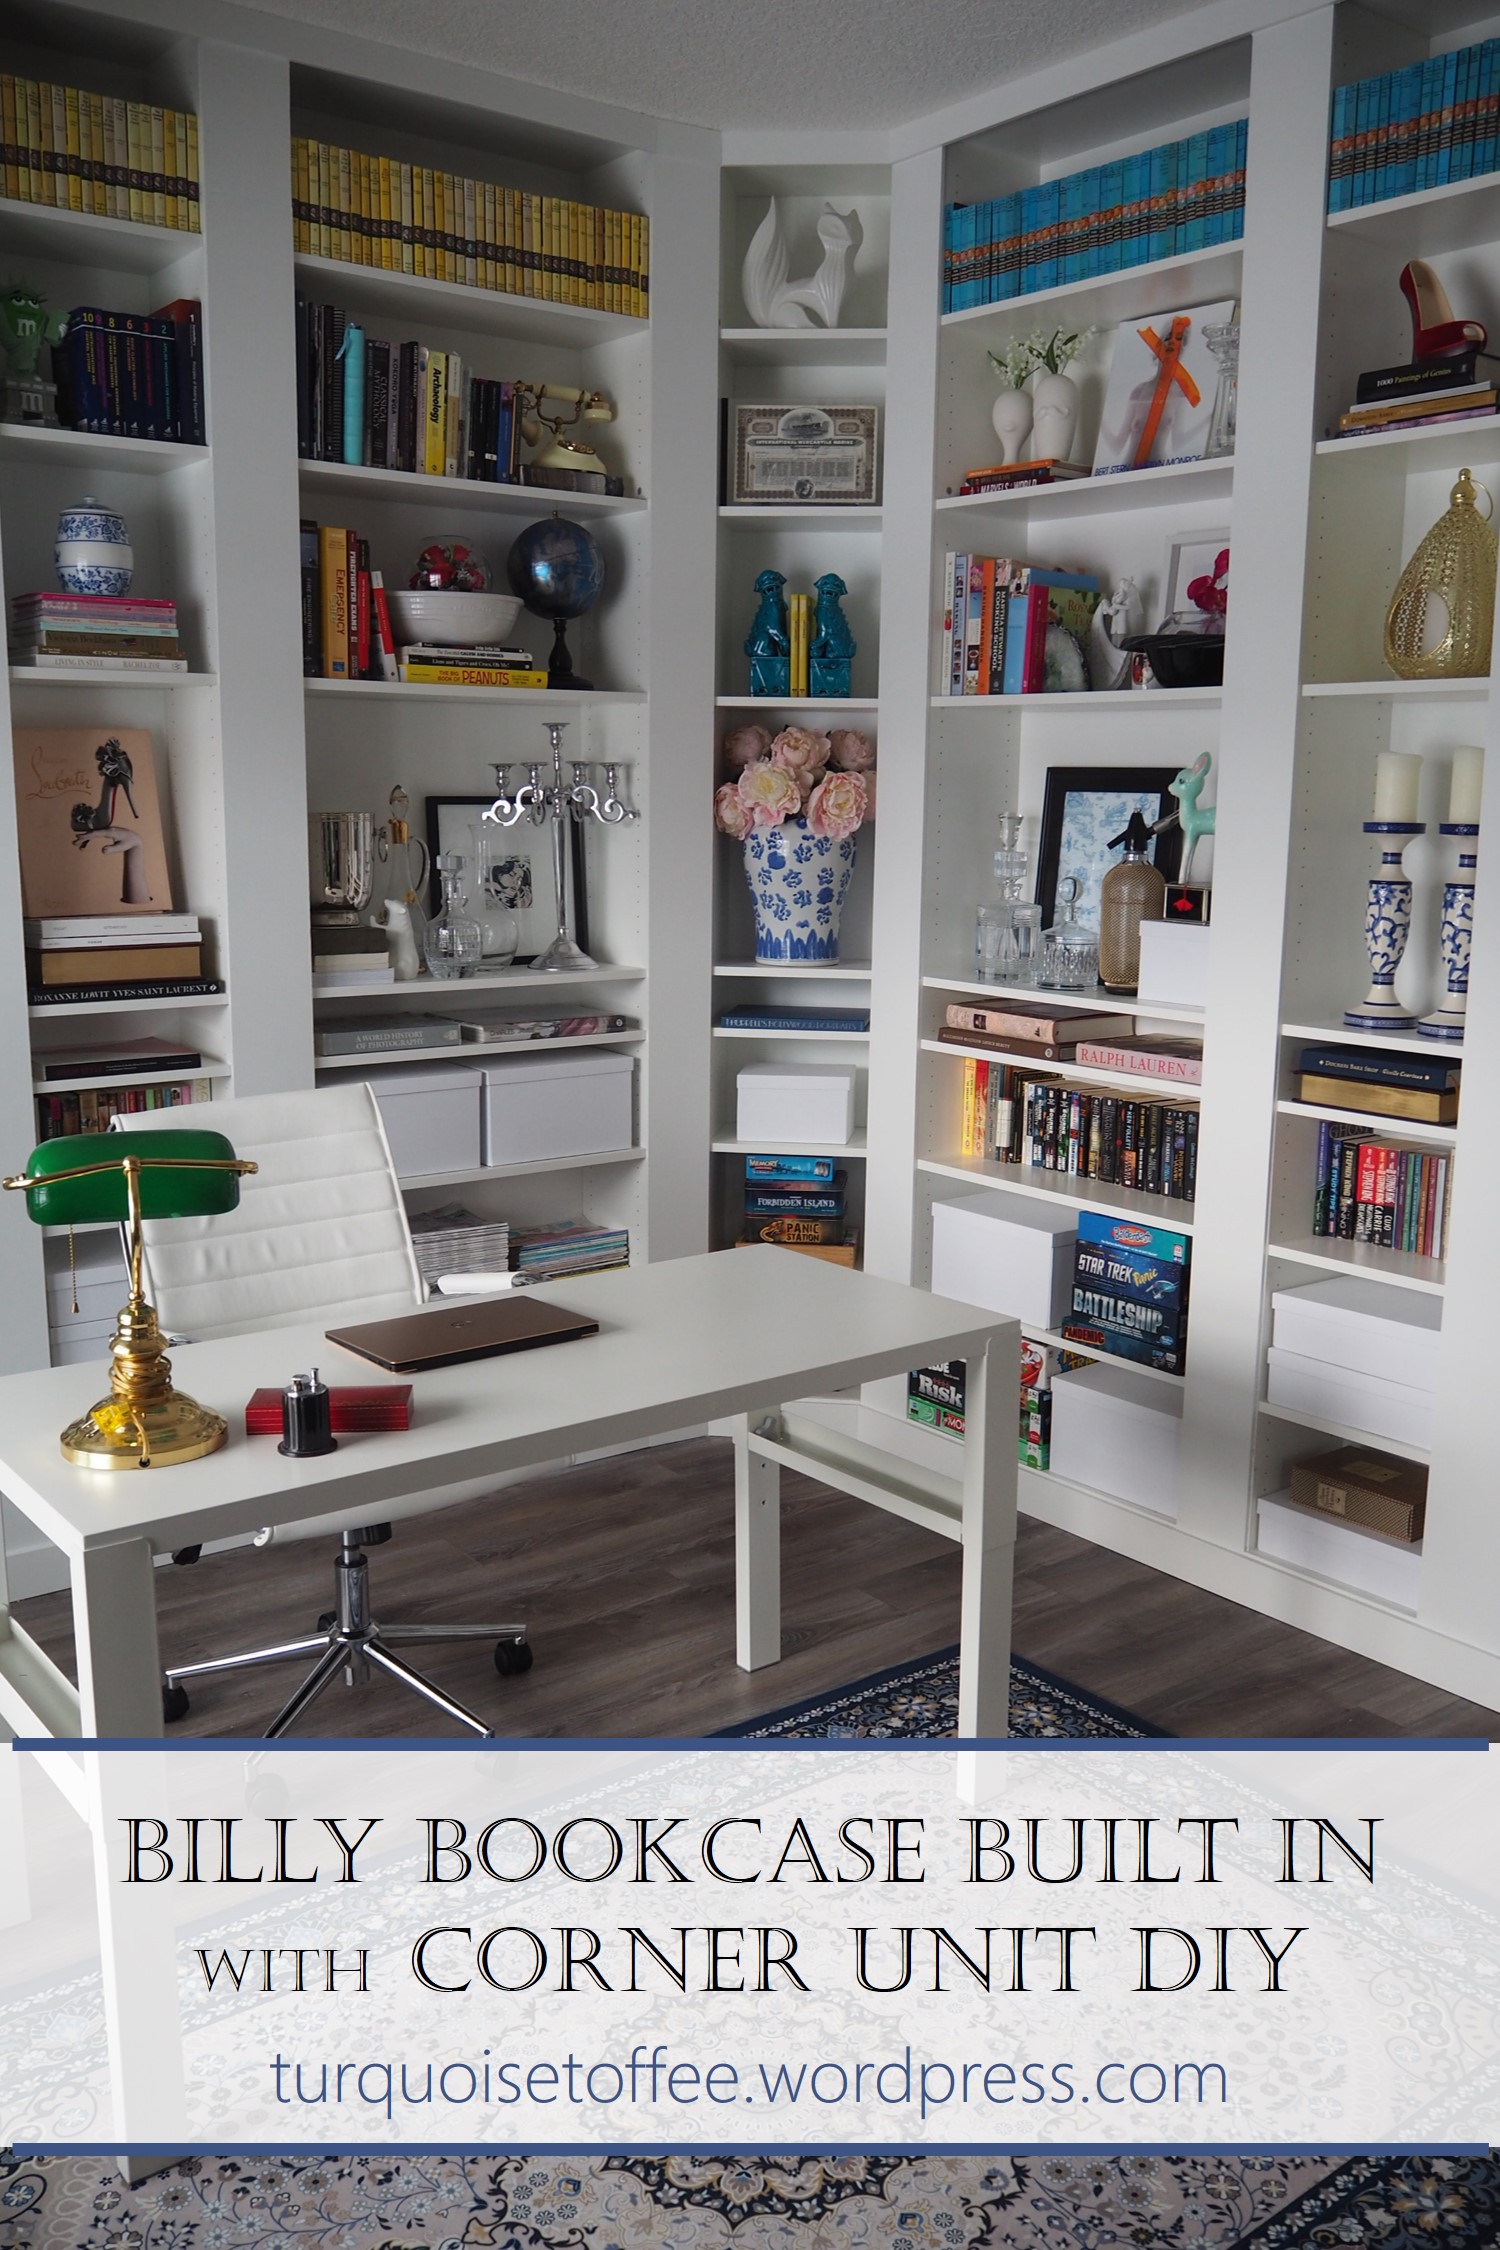 Billy Bookcase Built In With Corner Unit Diy Our Library Reveal